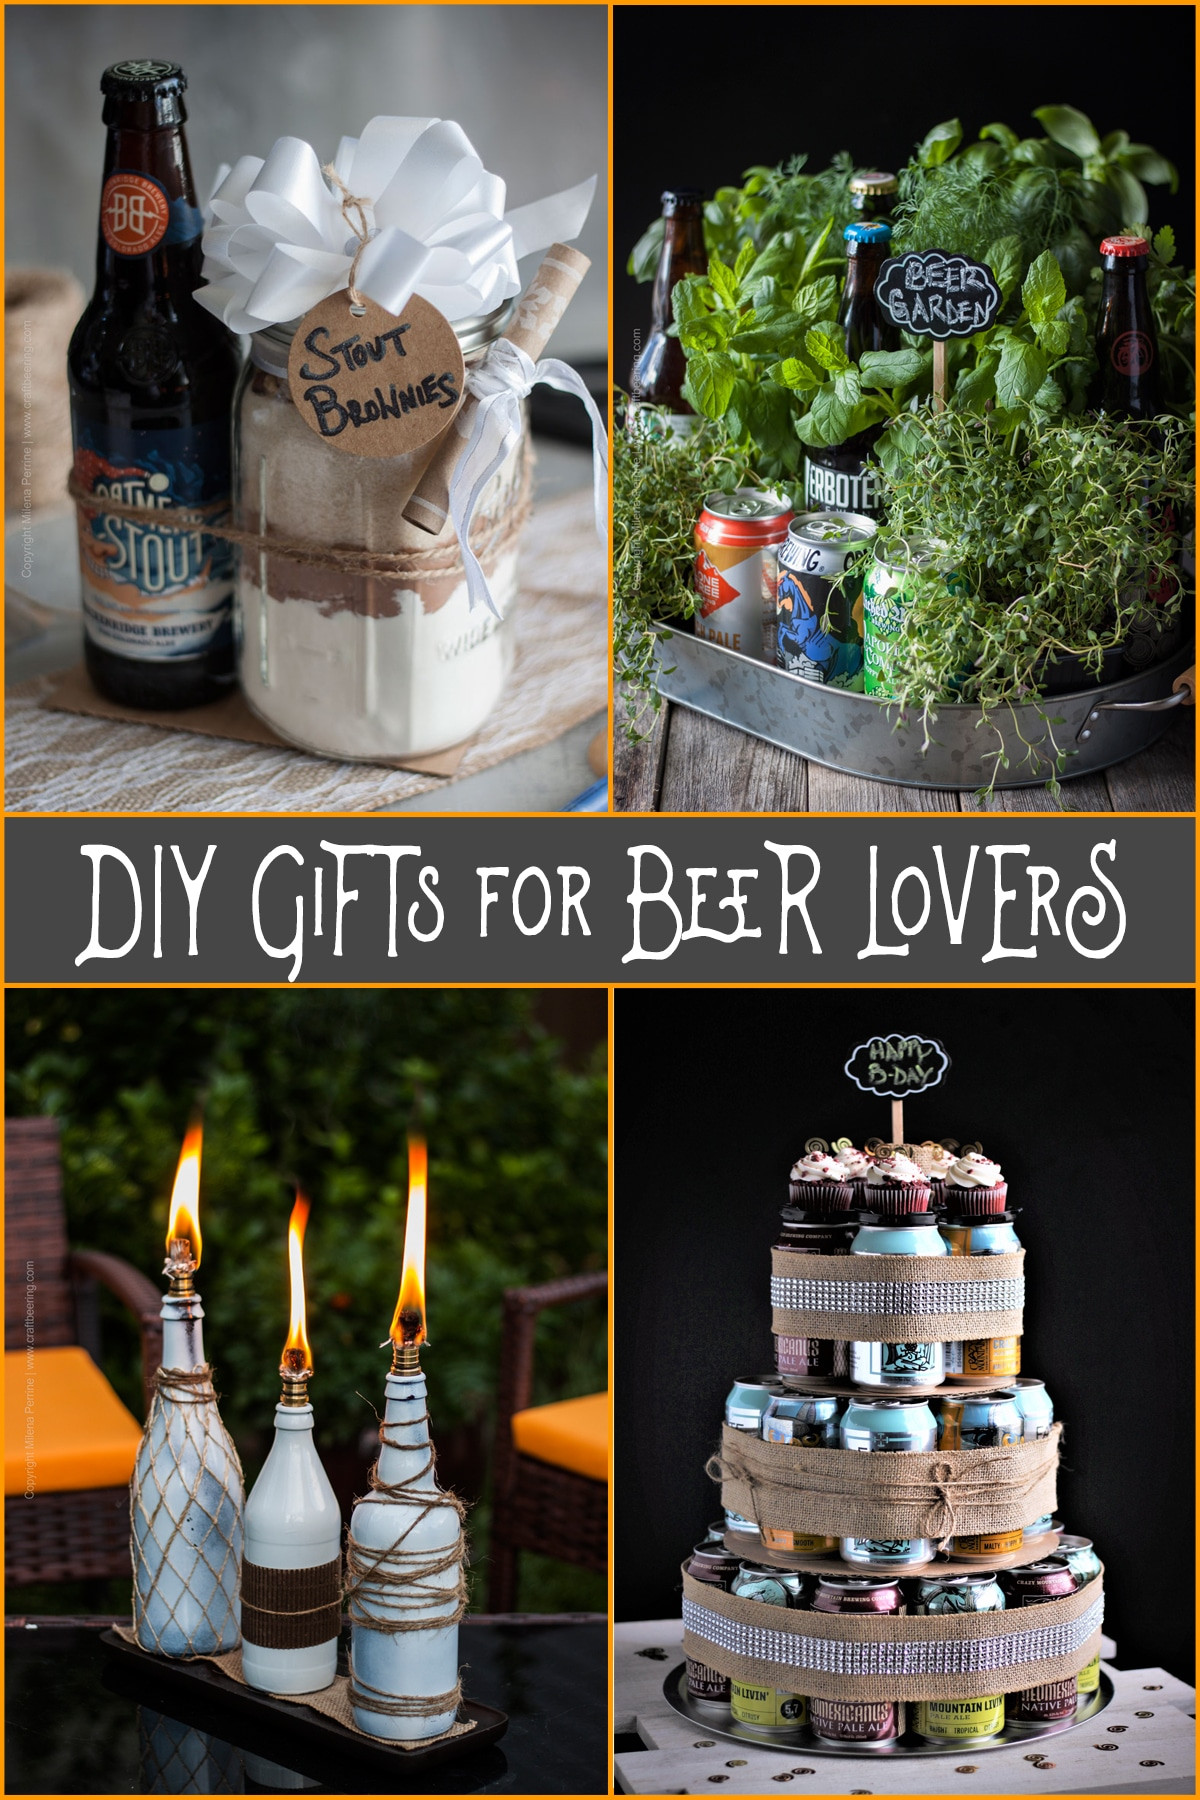 Gift Ideas For Craft Beer Lovers
 DIY Gifts for Beer Lovers A Round of Creative Ideas